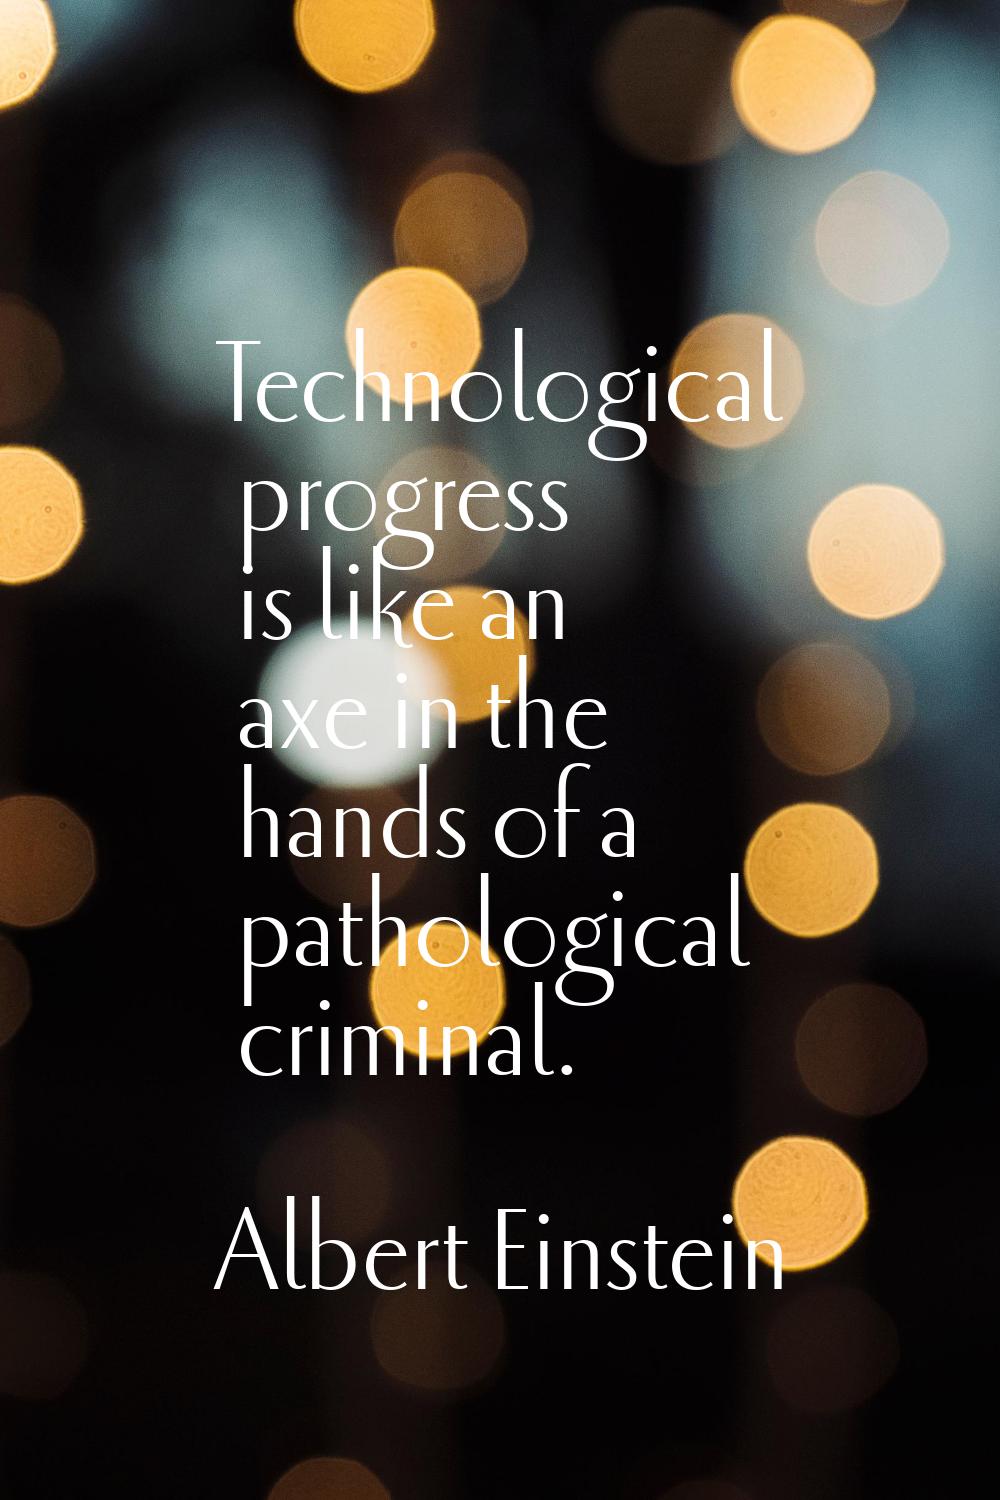 Technological progress is like an axe in the hands of a pathological criminal.